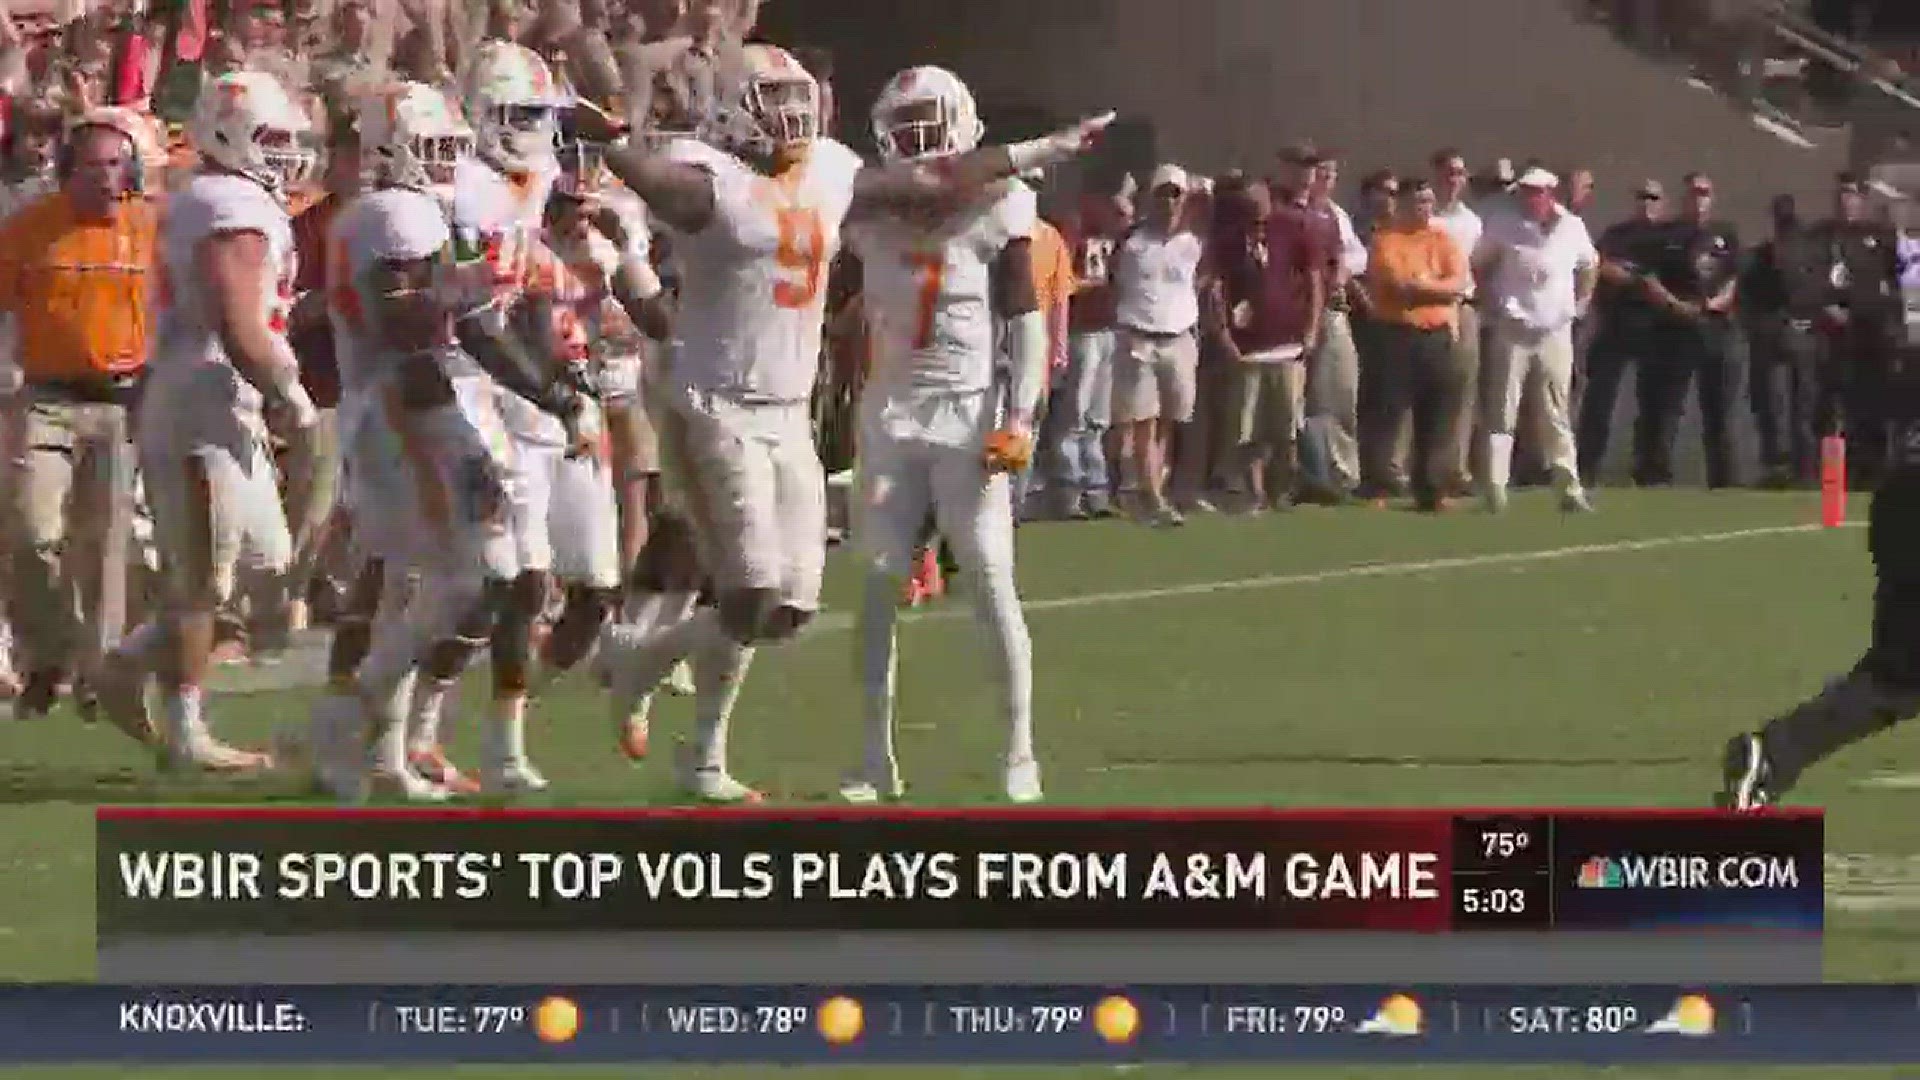 WBIR 10Sports anchor Patrick Murray takes a look at the top three plays you might not have noticed from the Vols double overtime loss to Texas A&M.